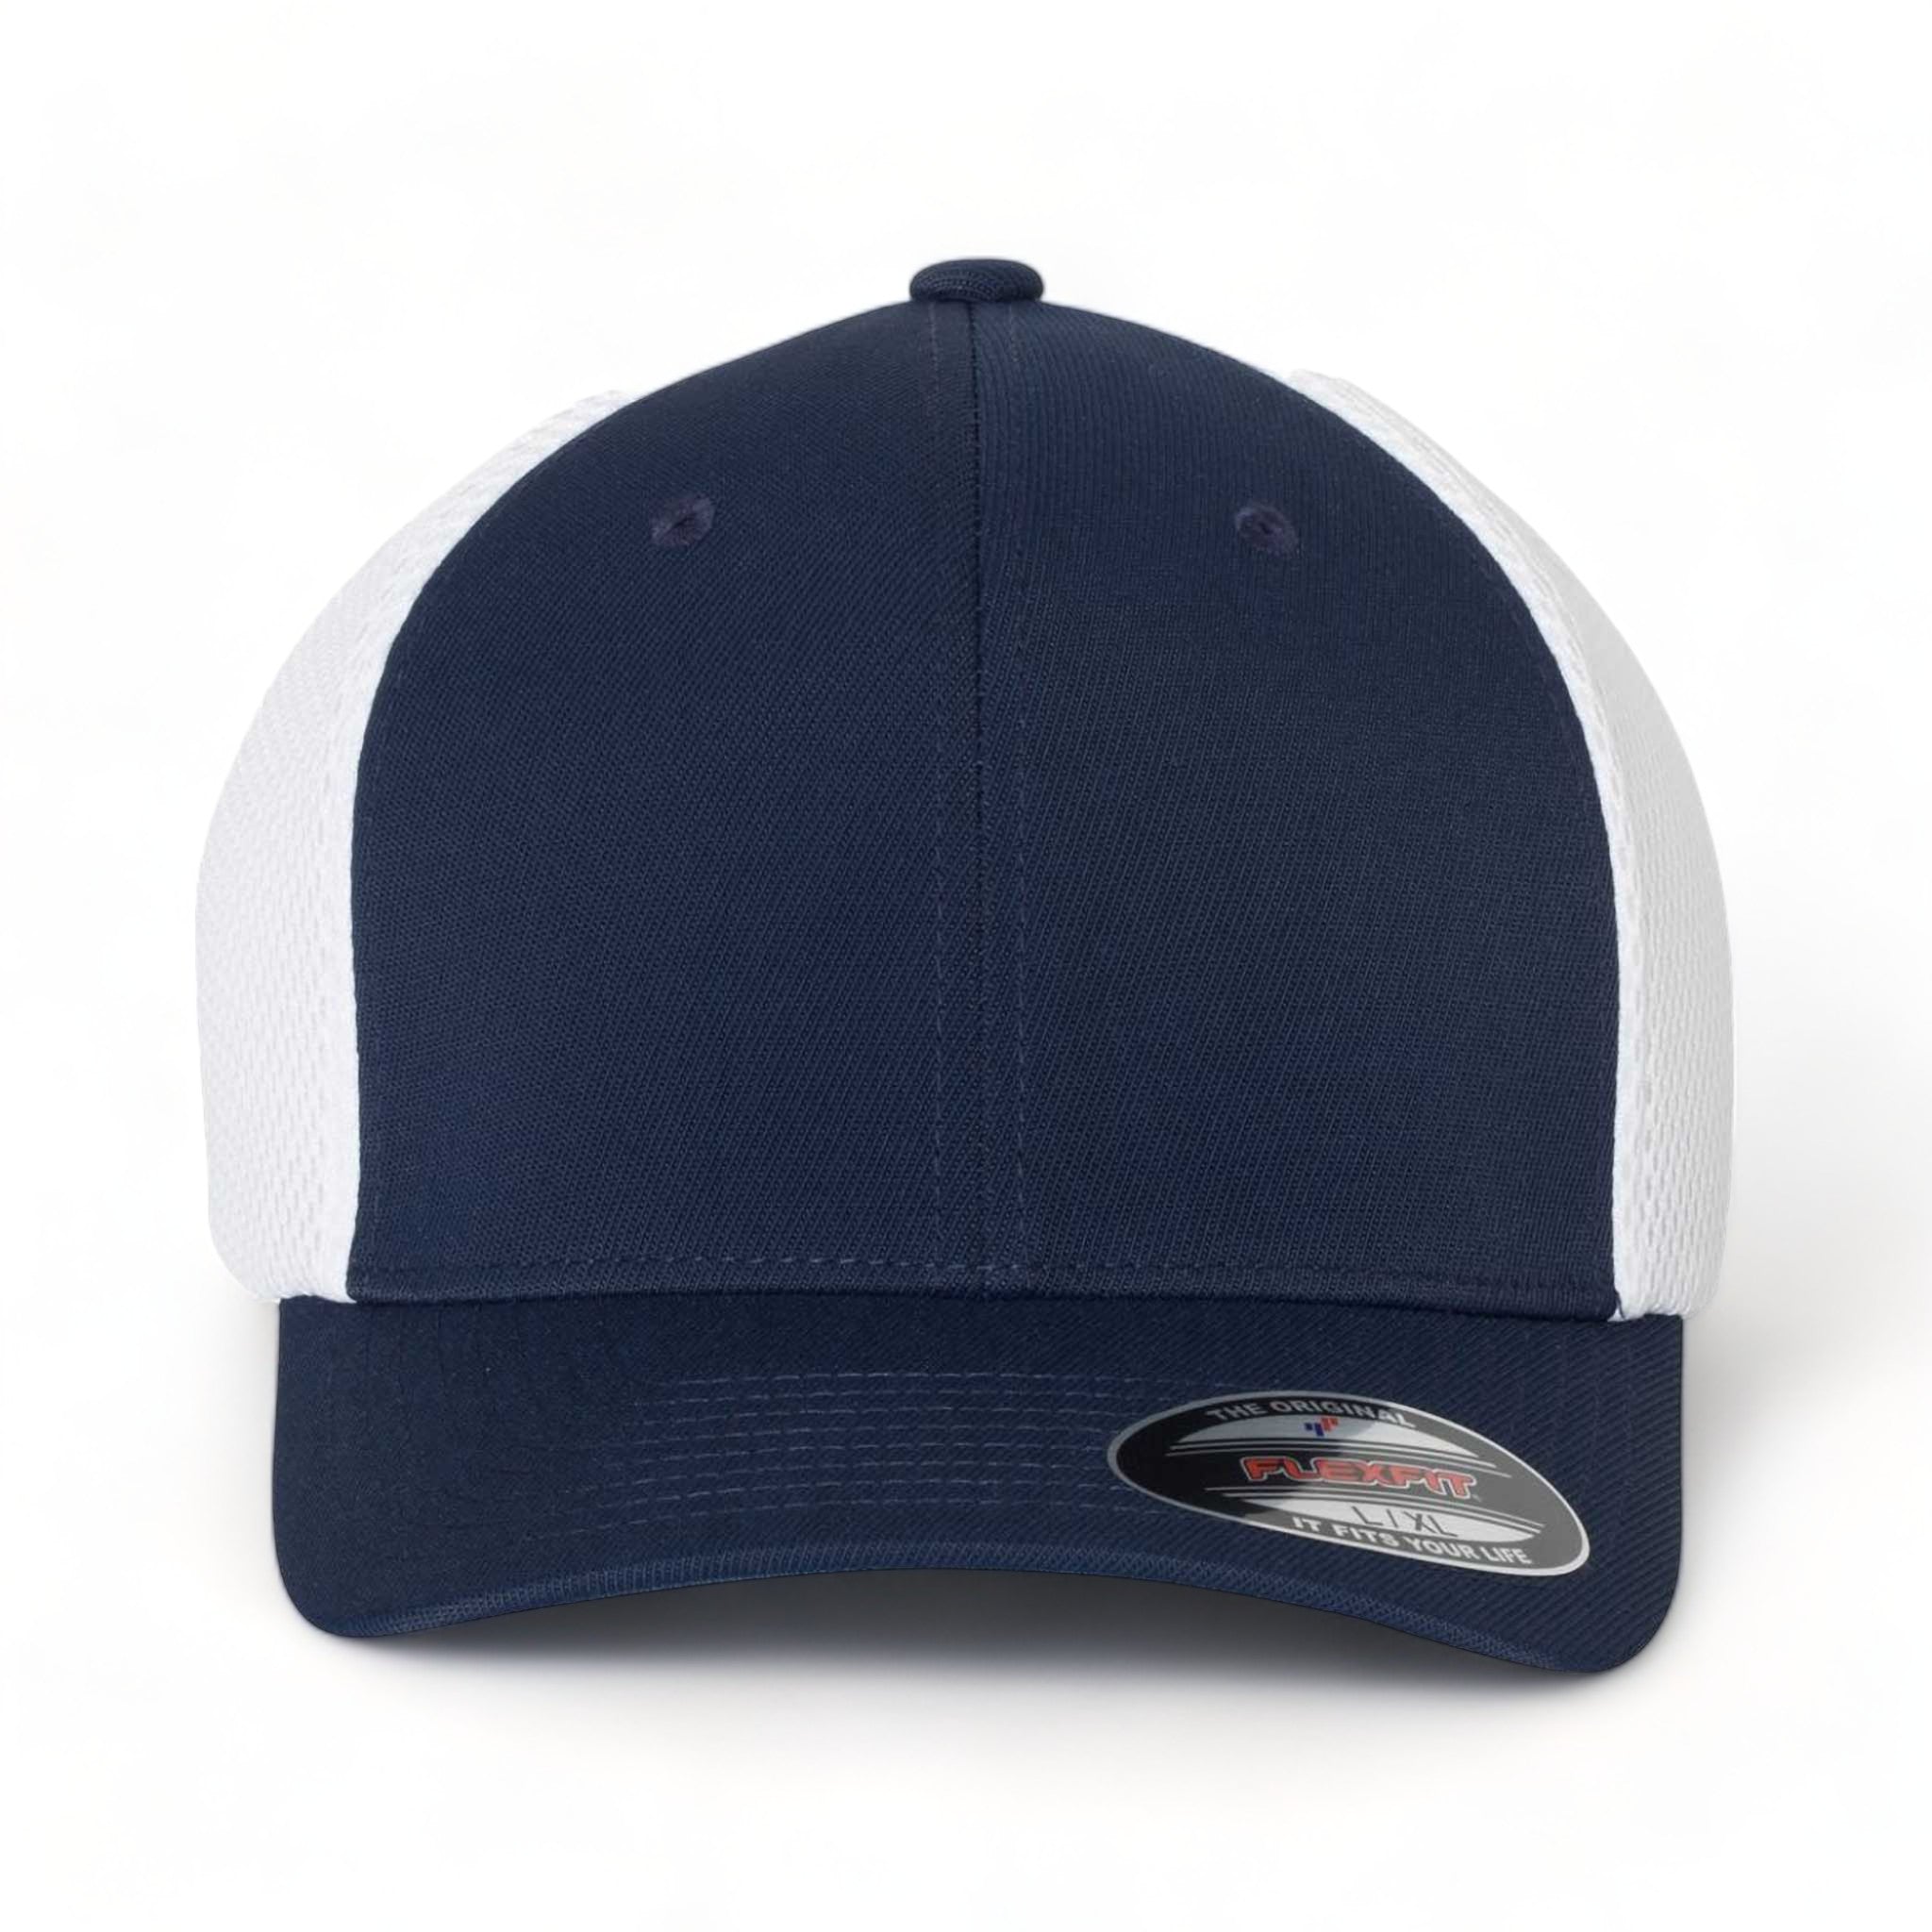 Front view of Flexfit 6533 custom hat in navy and white